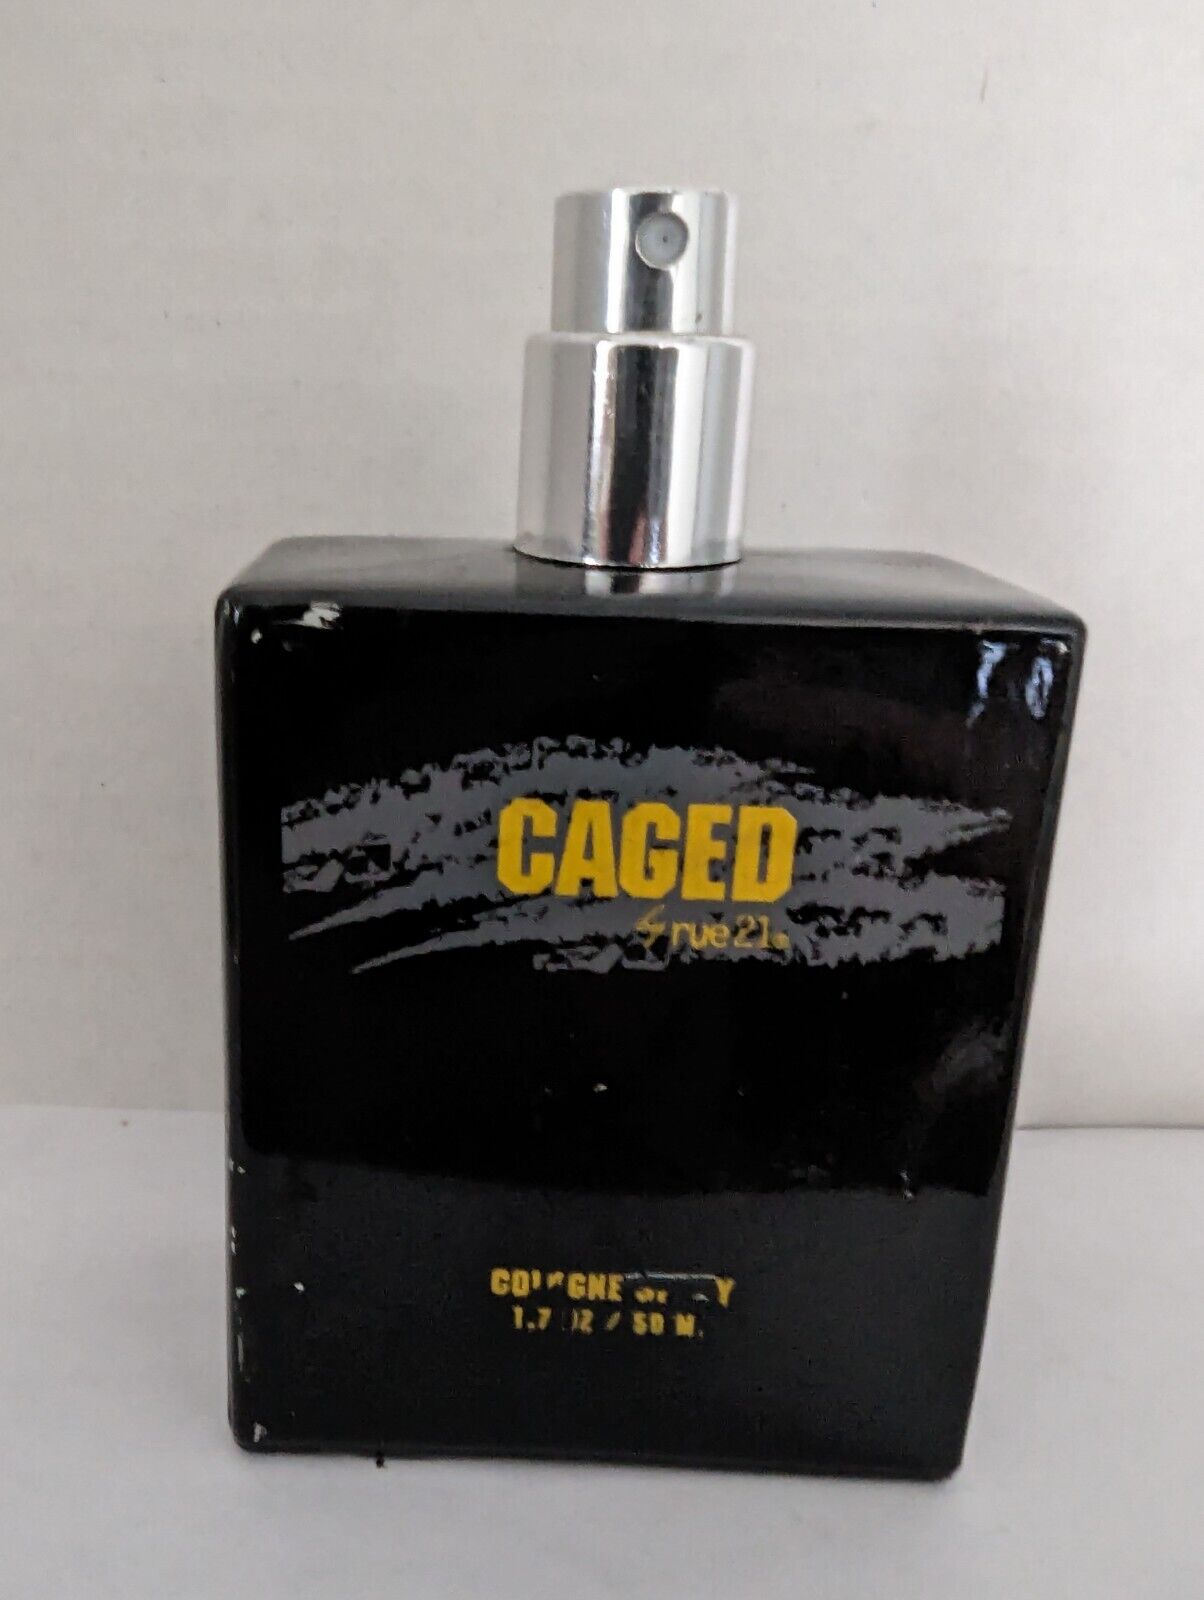 Caged Cologne Rue21 Spray Bottle 1.7 oz/ 50ml Approx 50 % full